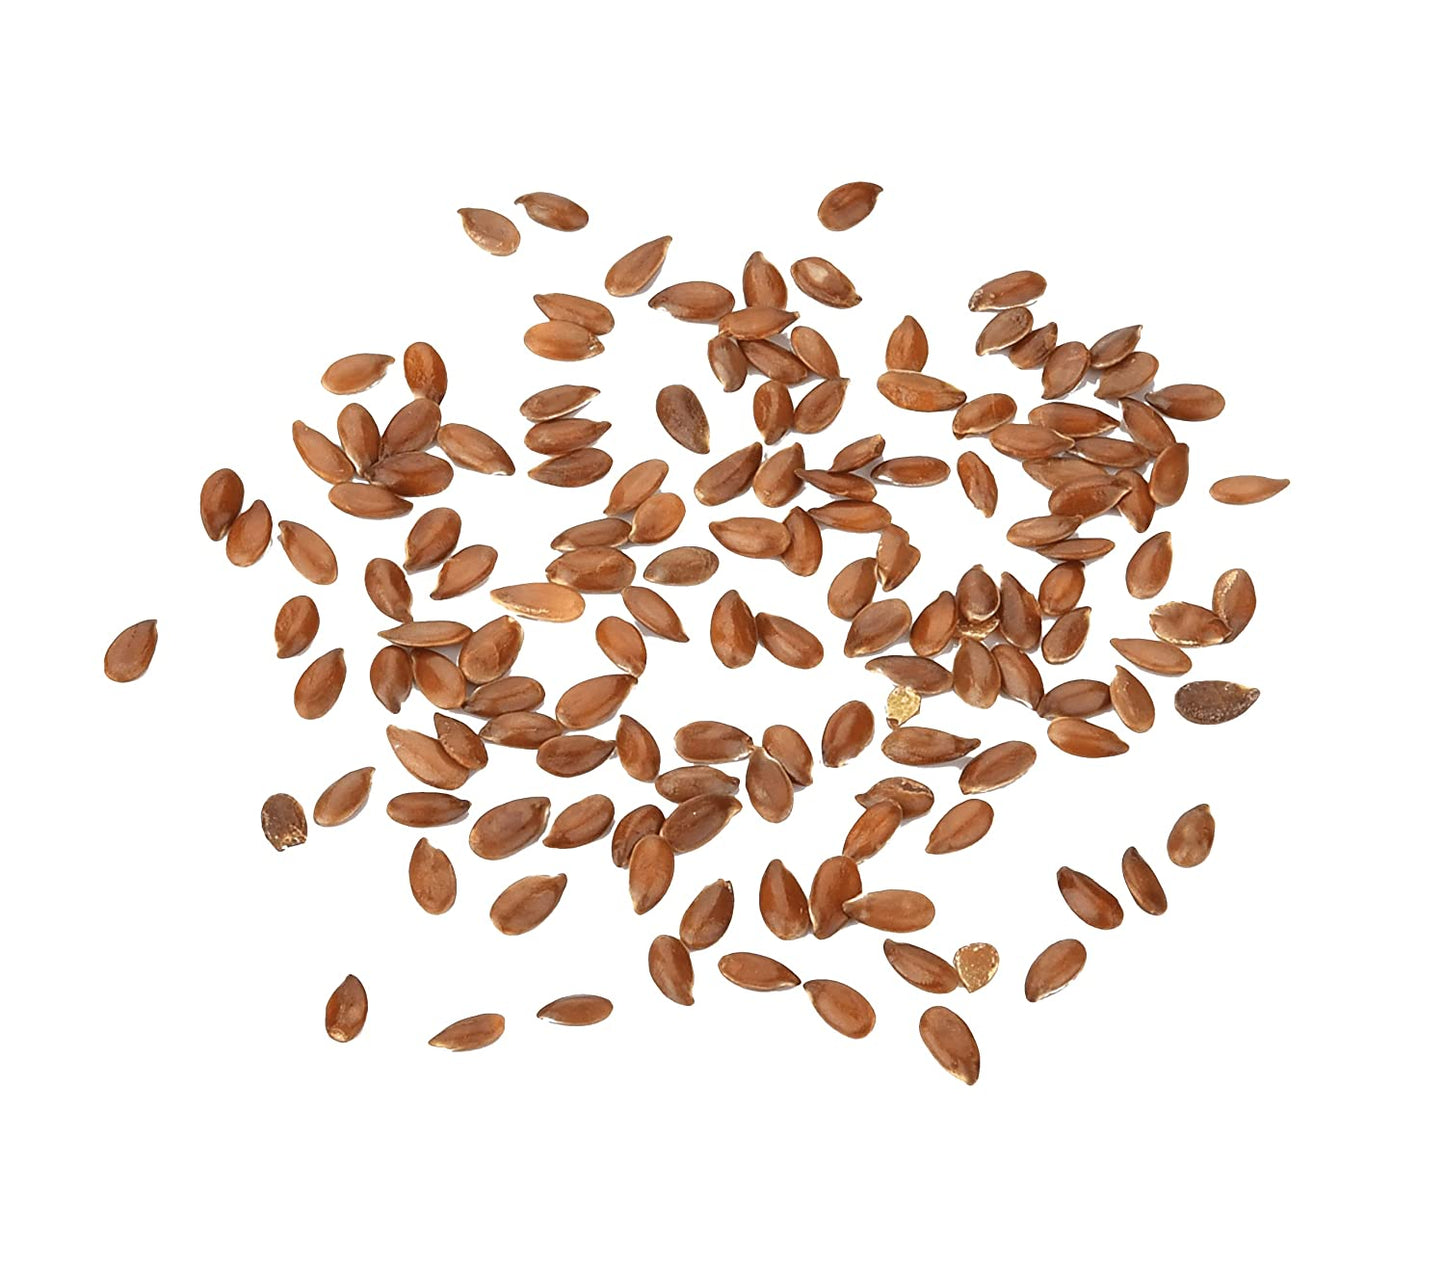 Raw Flax Seeds for Eating Rich with Fiber for Weight Loss - 250g